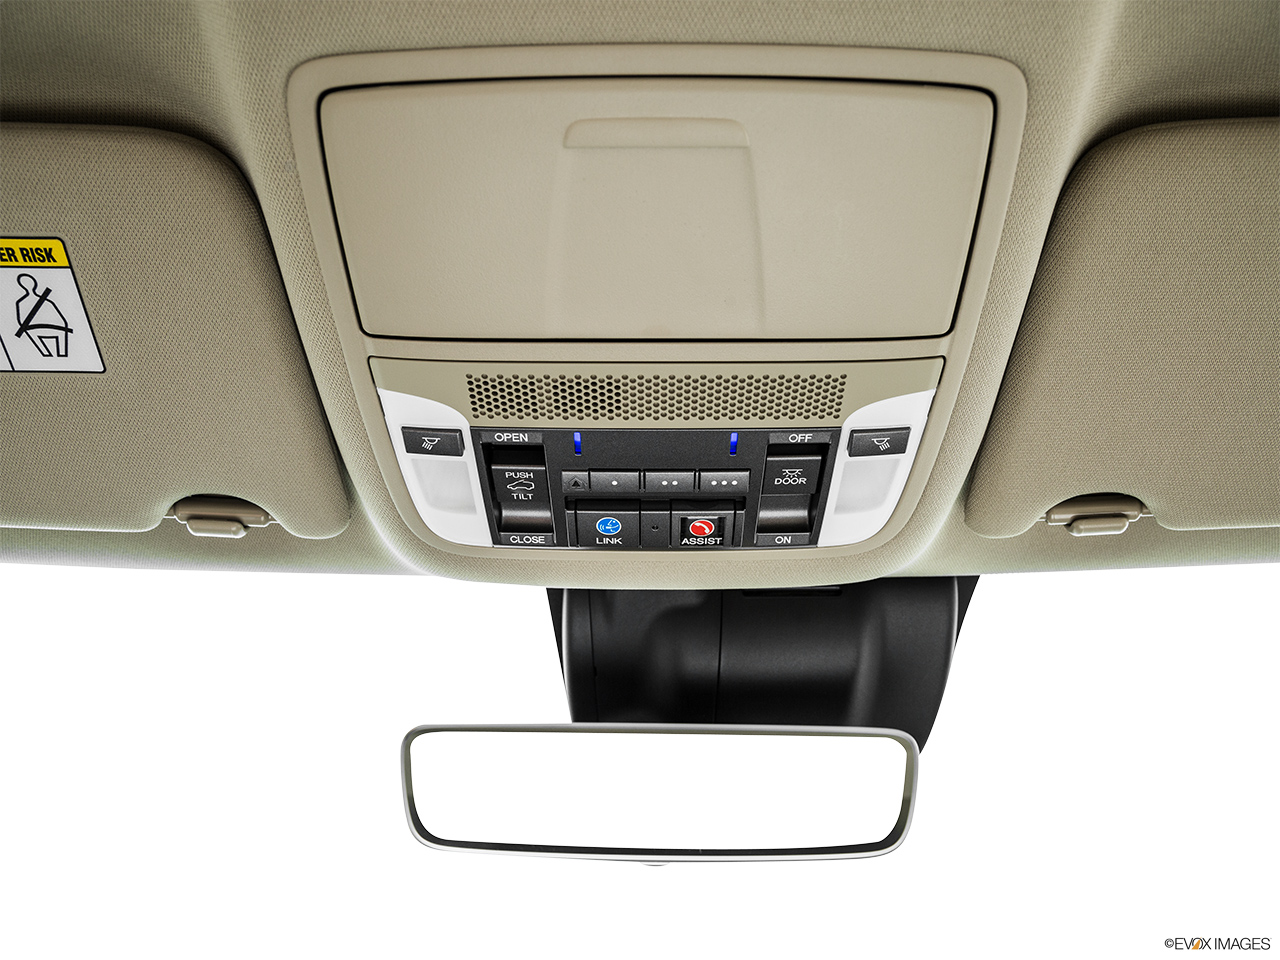 2016 Acura MDX SH-AWD Courtesy lamps/ceiling controls. 